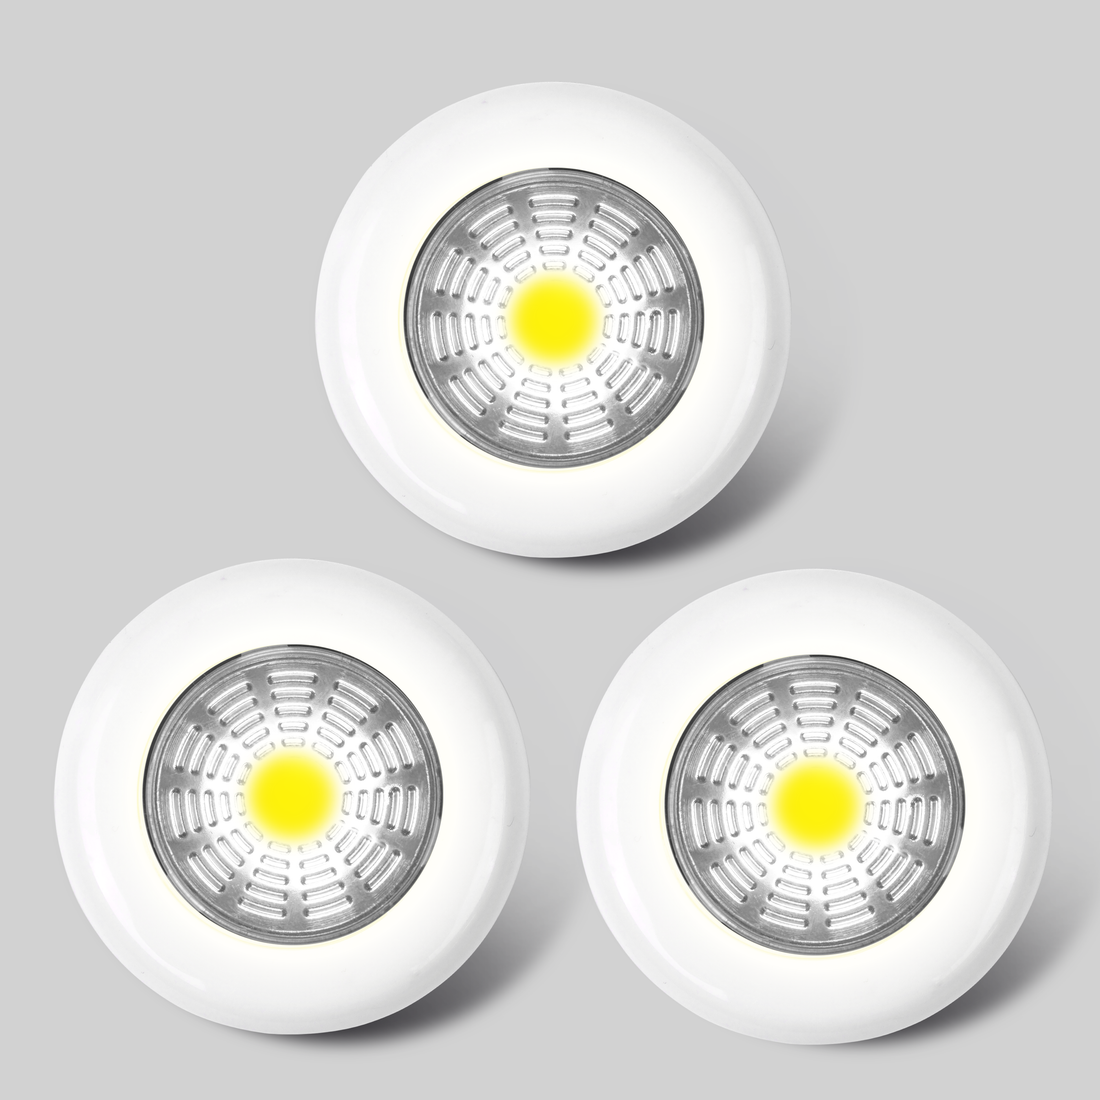 3 PUSHLIGHTS PLASTIC WHITE D6,8 CM LED 50LM NATURAL LIGHT BATTERY OPERATED